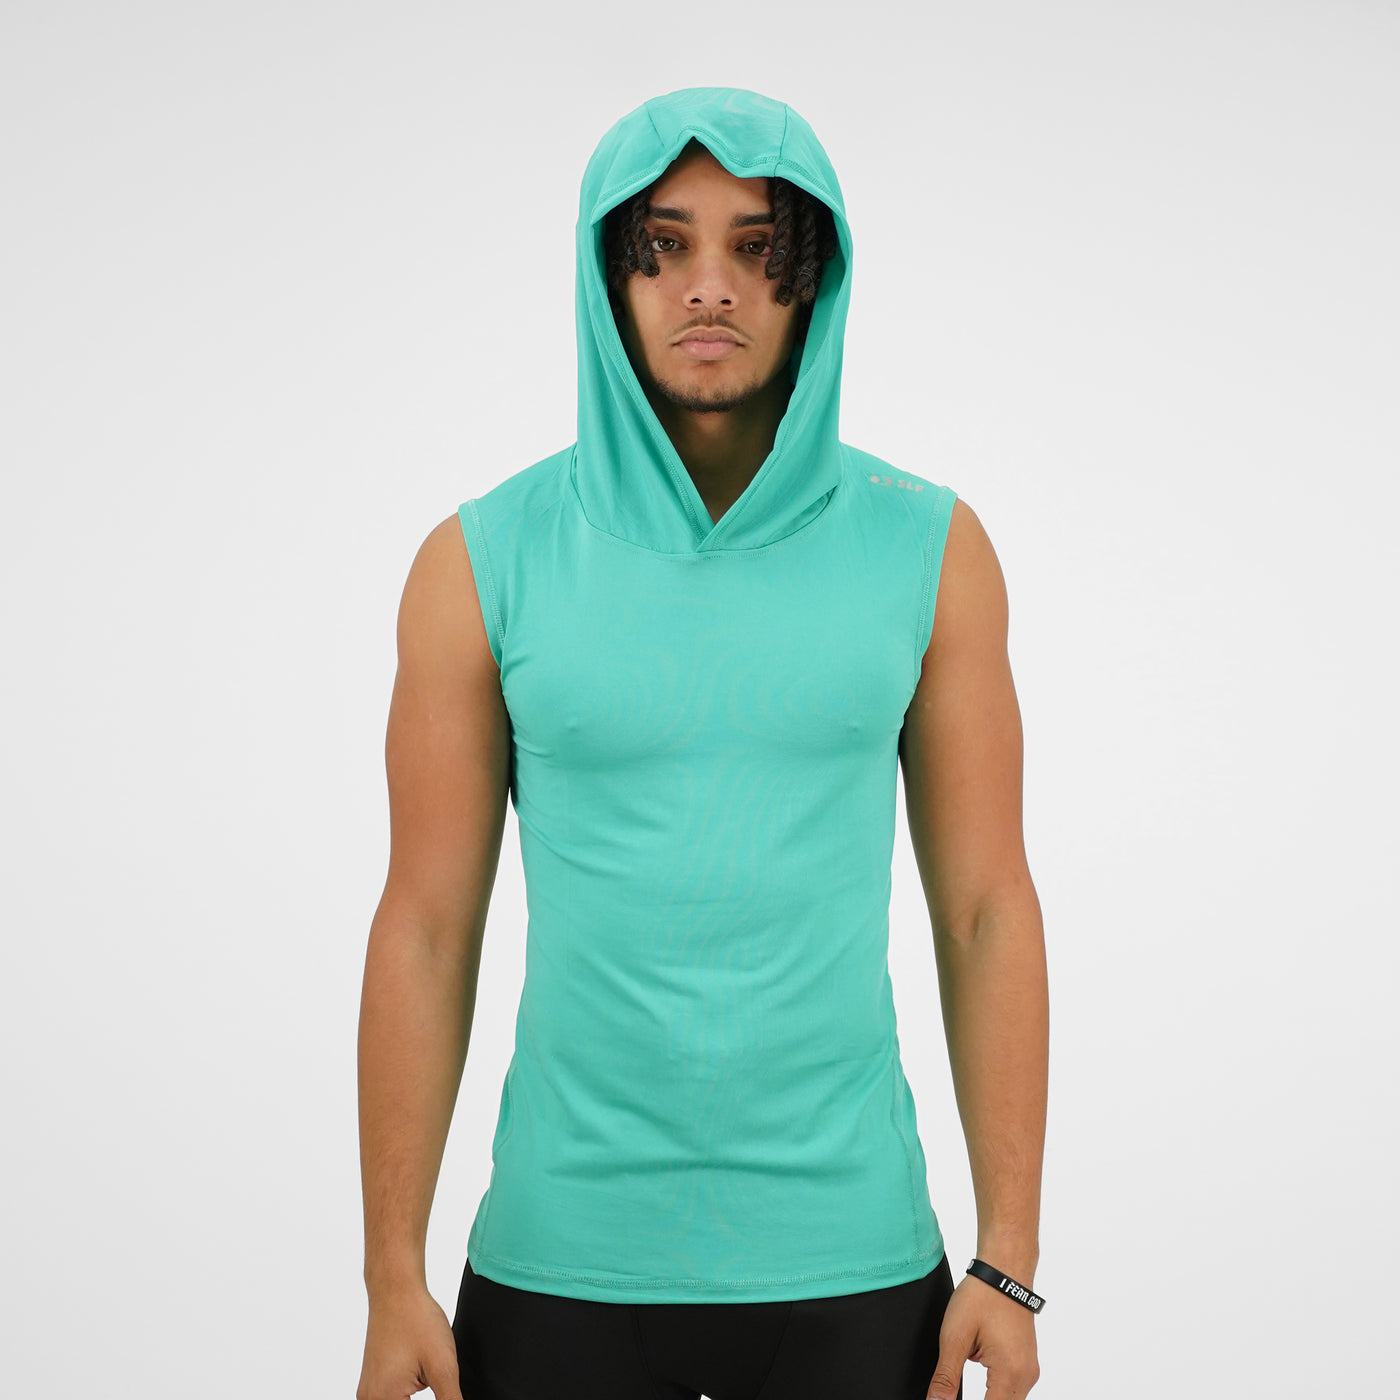 Teal Sleeveless Compression Hoodie